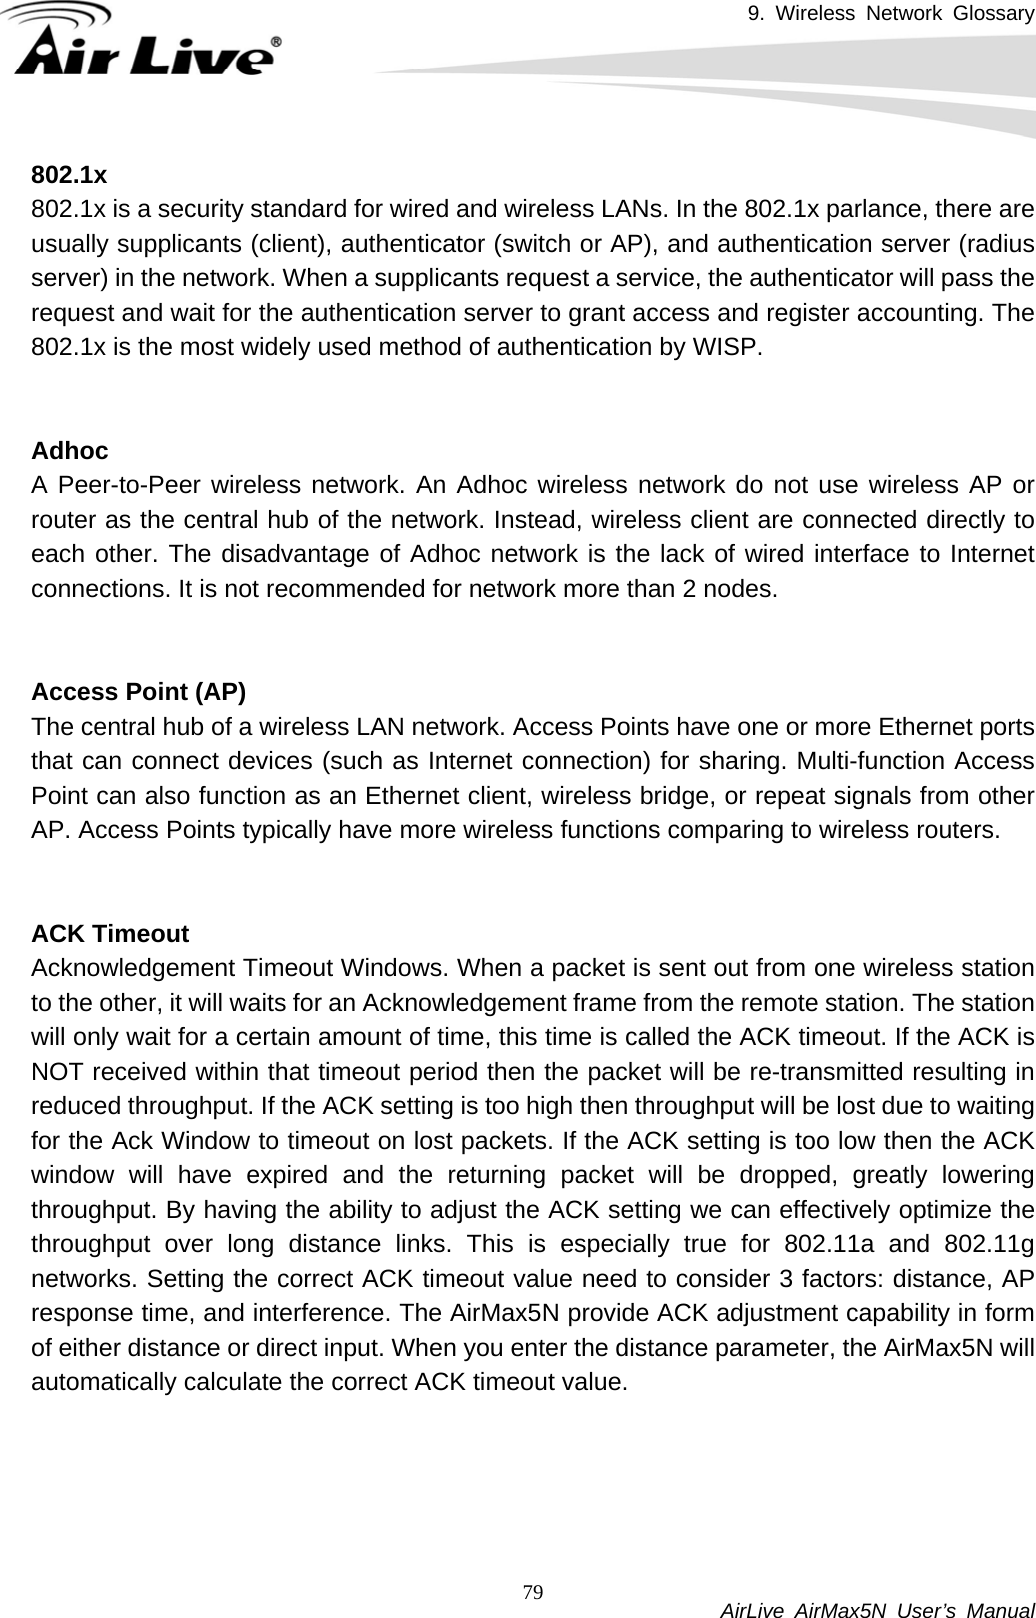 9. Wireless Network Glossary           AirLive AirMax5N User’s Manual 79802.1x802.1x is a security standard for wired and wireless LANs. In the 802.1x parlance, there are usually supplicants (client), authenticator (switch or AP), and authentication server (radius server) in the network. When a supplicants request a service, the authenticator will pass the request and wait for the authentication server to grant access and register accounting. The 802.1x is the most widely used method of authentication by WISP.   Adhoc A Peer-to-Peer wireless network. An Adhoc wireless network do not use wireless AP or router as the central hub of the network. Instead, wireless client are connected directly to each other. The disadvantage of Adhoc network is the lack of wired interface to Internet connections. It is not recommended for network more than 2 nodes.   Access Point (AP)The central hub of a wireless LAN network. Access Points have one or more Ethernet ports that can connect devices (such as Internet connection) for sharing. Multi-function Access Point can also function as an Ethernet client, wireless bridge, or repeat signals from other AP. Access Points typically have more wireless functions comparing to wireless routers.   ACK TimeoutAcknowledgement Timeout Windows. When a packet is sent out from one wireless station to the other, it will waits for an Acknowledgement frame from the remote station. The station will only wait for a certain amount of time, this time is called the ACK timeout. If the ACK is NOT received within that timeout period then the packet will be re-transmitted resulting in reduced throughput. If the ACK setting is too high then throughput will be lost due to waiting for the Ack Window to timeout on lost packets. If the ACK setting is too low then the ACK window will have expired and the returning packet will be dropped, greatly lowering throughput. By having the ability to adjust the ACK setting we can effectively optimize the throughput over long distance links. This is especially true for 802.11a and 802.11g networks. Setting the correct ACK timeout value need to consider 3 factors: distance, AP response time, and interference. The AirMax5N provide ACK adjustment capability in form of either distance or direct input. When you enter the distance parameter, the AirMax5N will automatically calculate the correct ACK timeout value.       